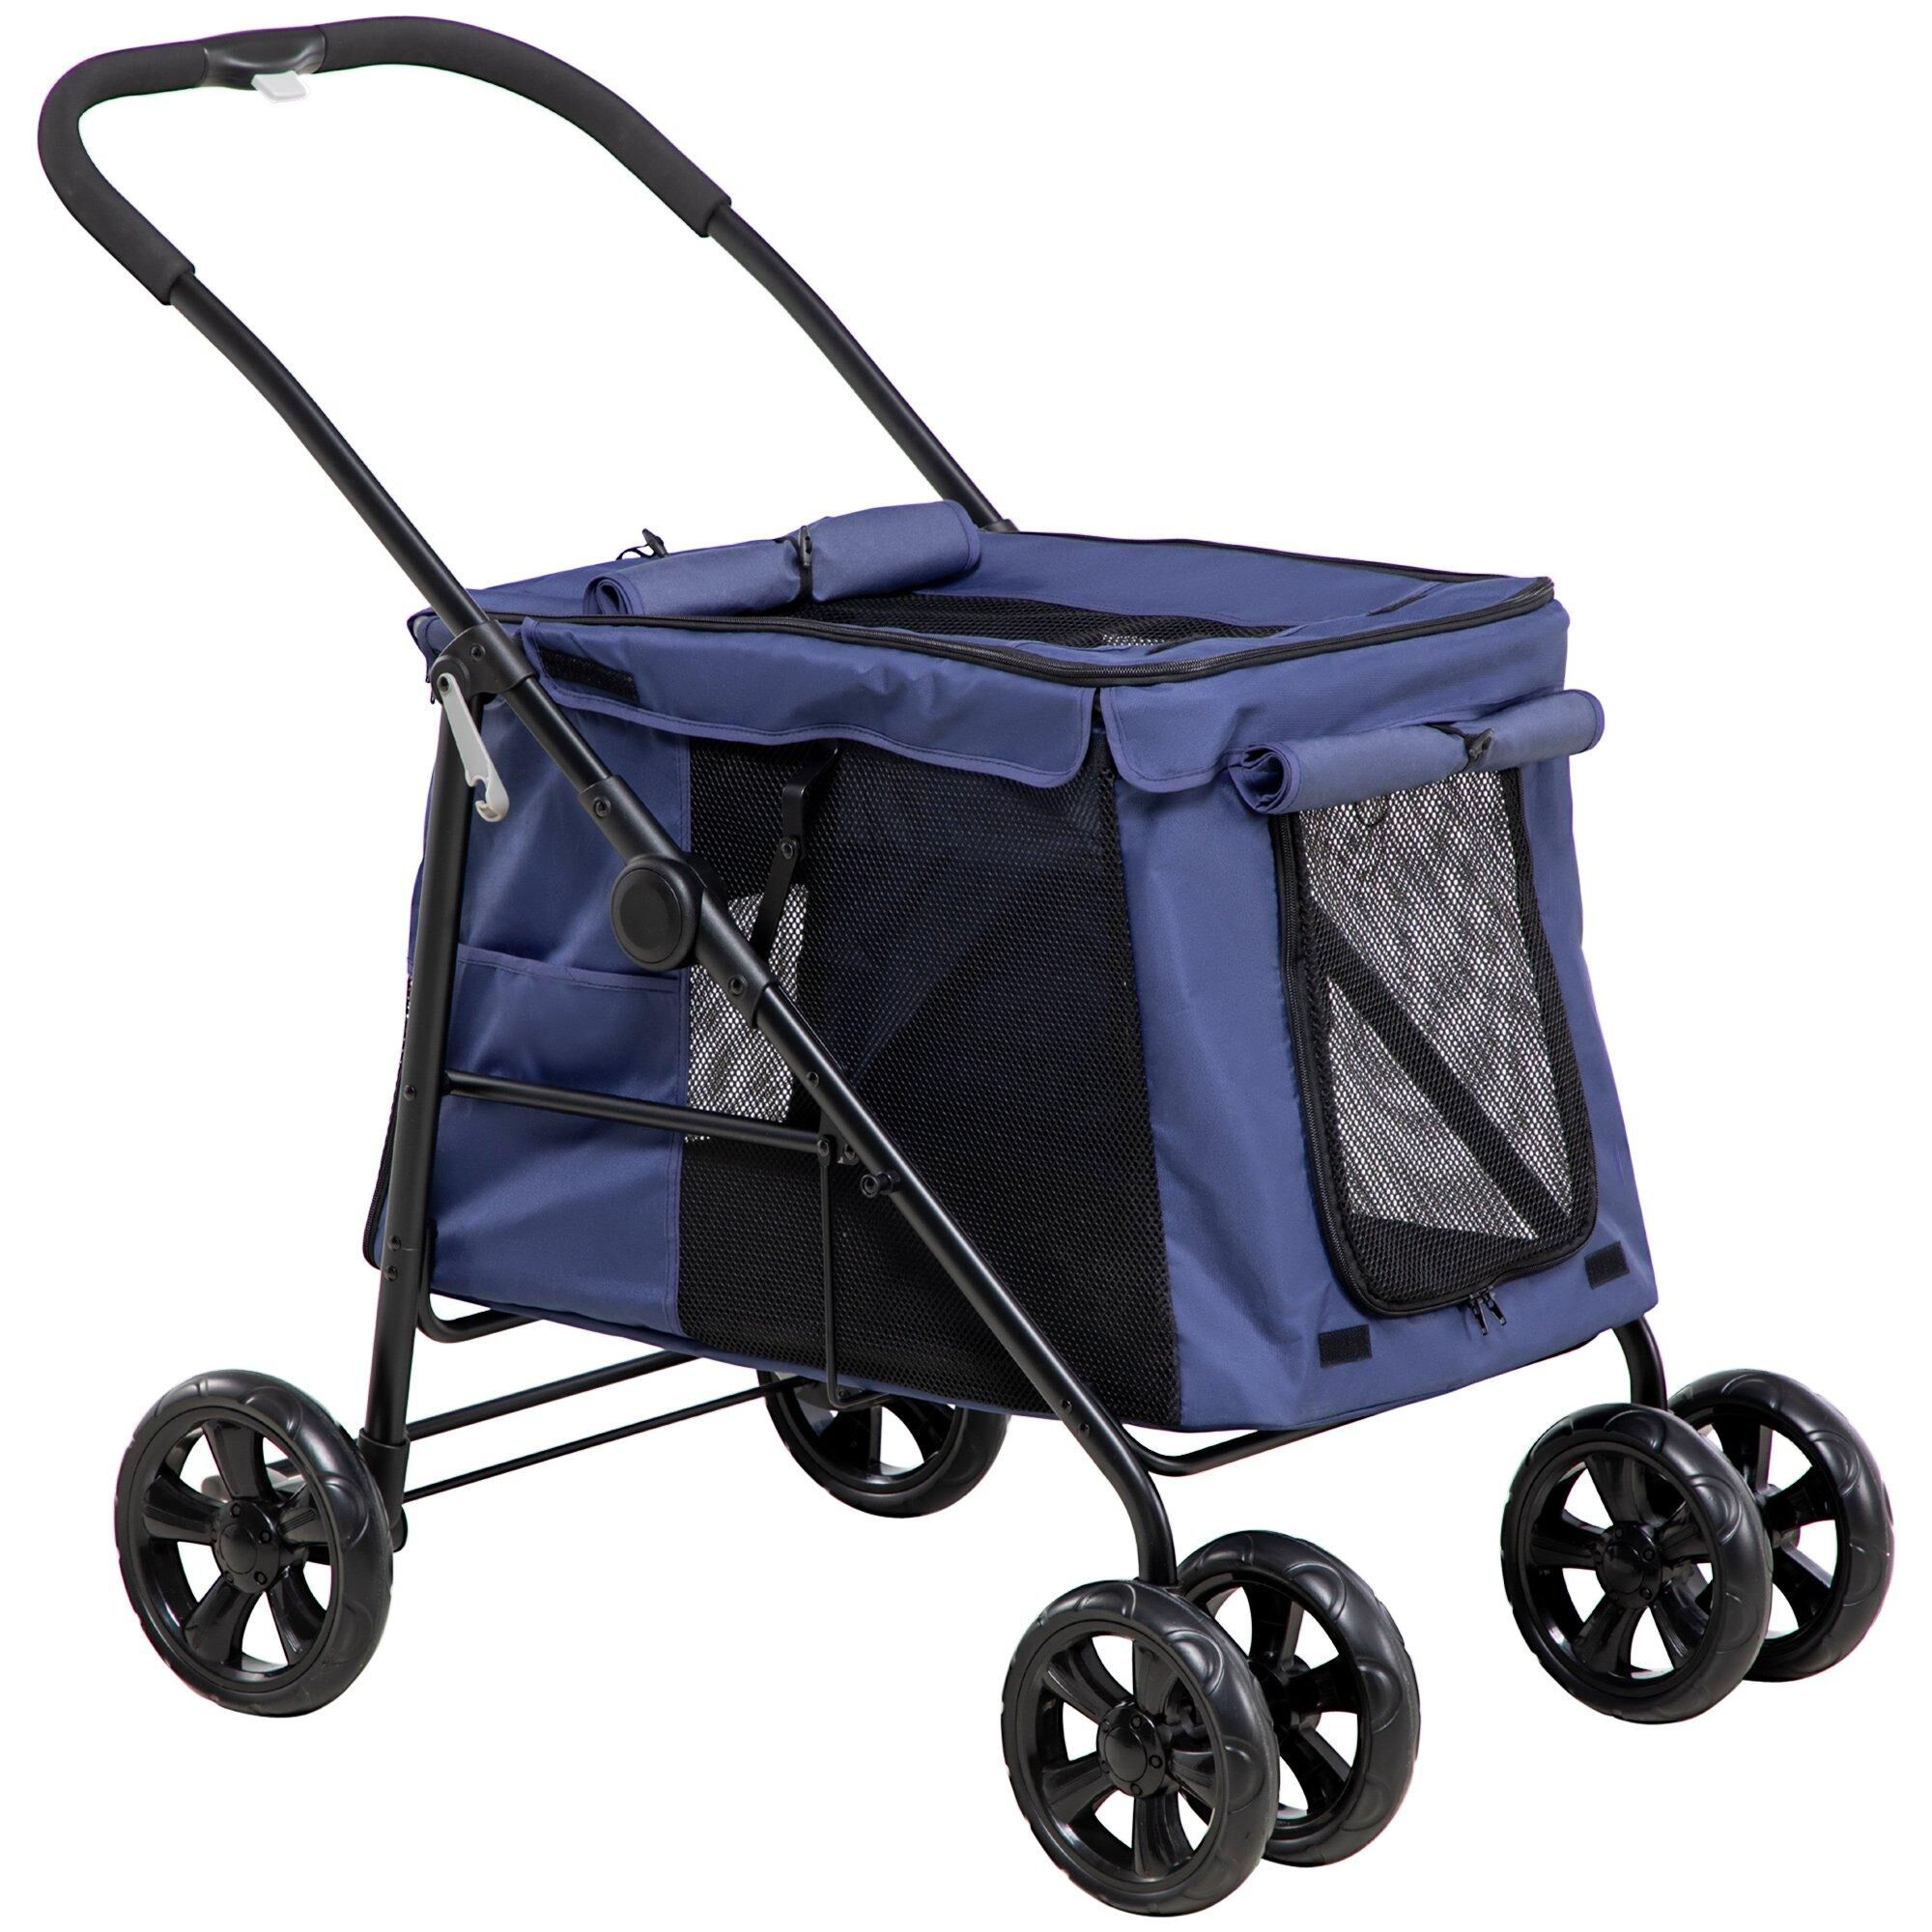 PawHut One-Click Foldable Pet Stroller, Dog Cat Travel Pushchair with EVA Wheels, Storage Bags, Mesh Windows, Doors, Safety Leash, Cushion, for Small Pets